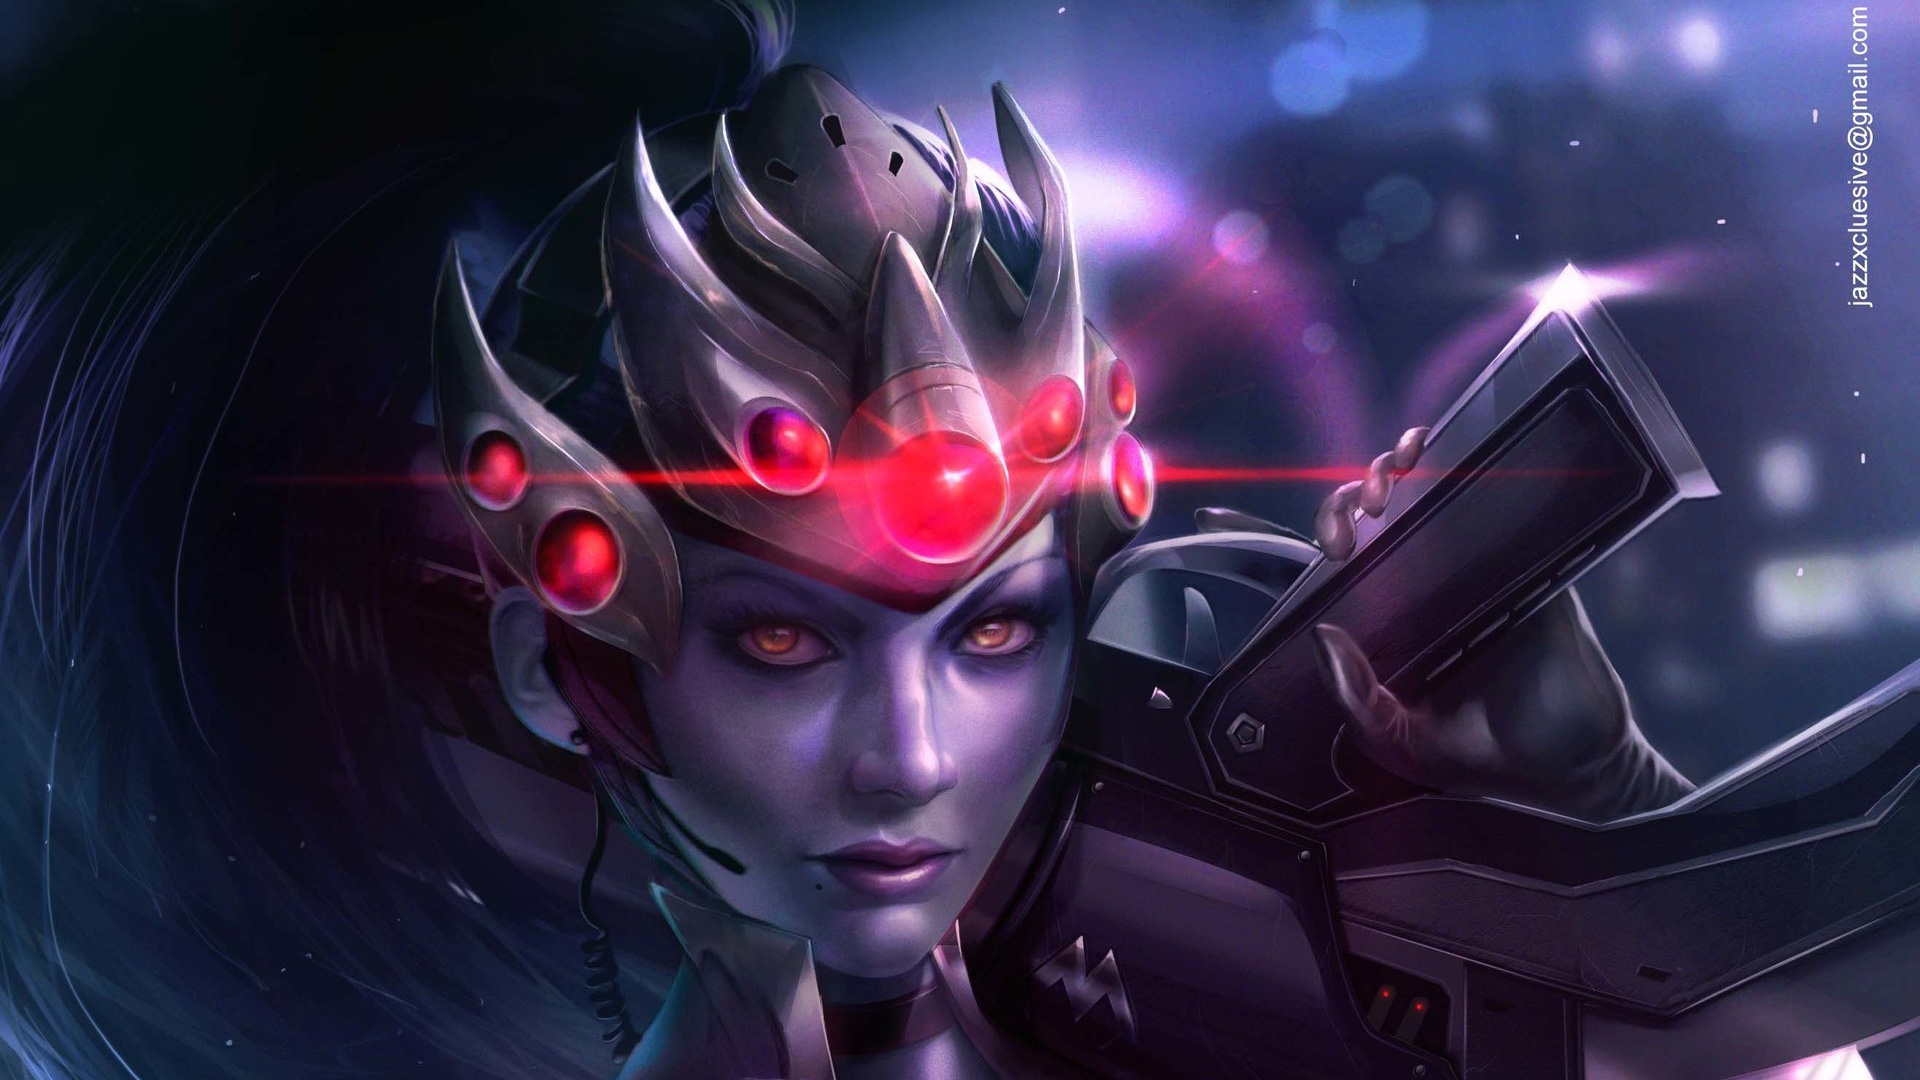 Widowmaker Overwatch Videogame Hd Games 4k Wallpapers Images Backgrounds Photos And Pictures